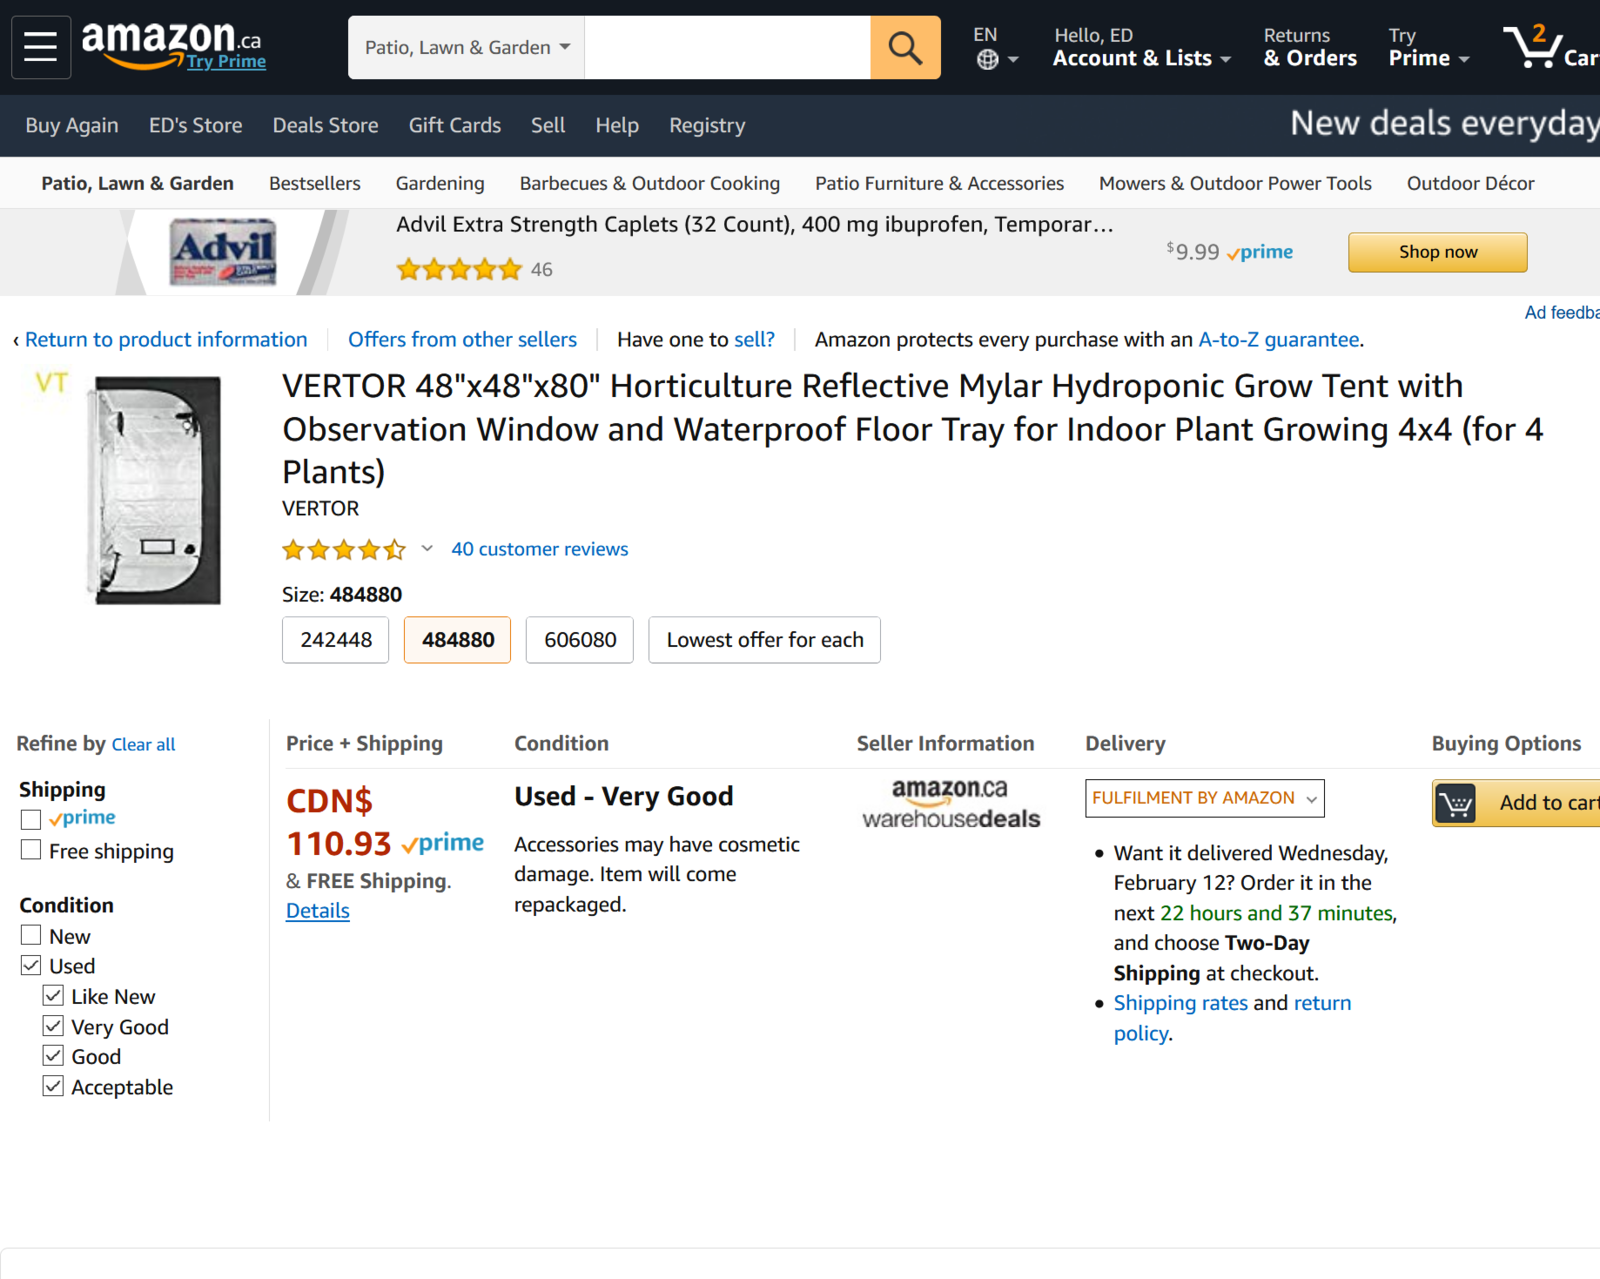 Screenshot_2020-02-09 Amazon ca Buying Choices VERTOR 48 x48 x80 Horticulture Reflective Mylar...png